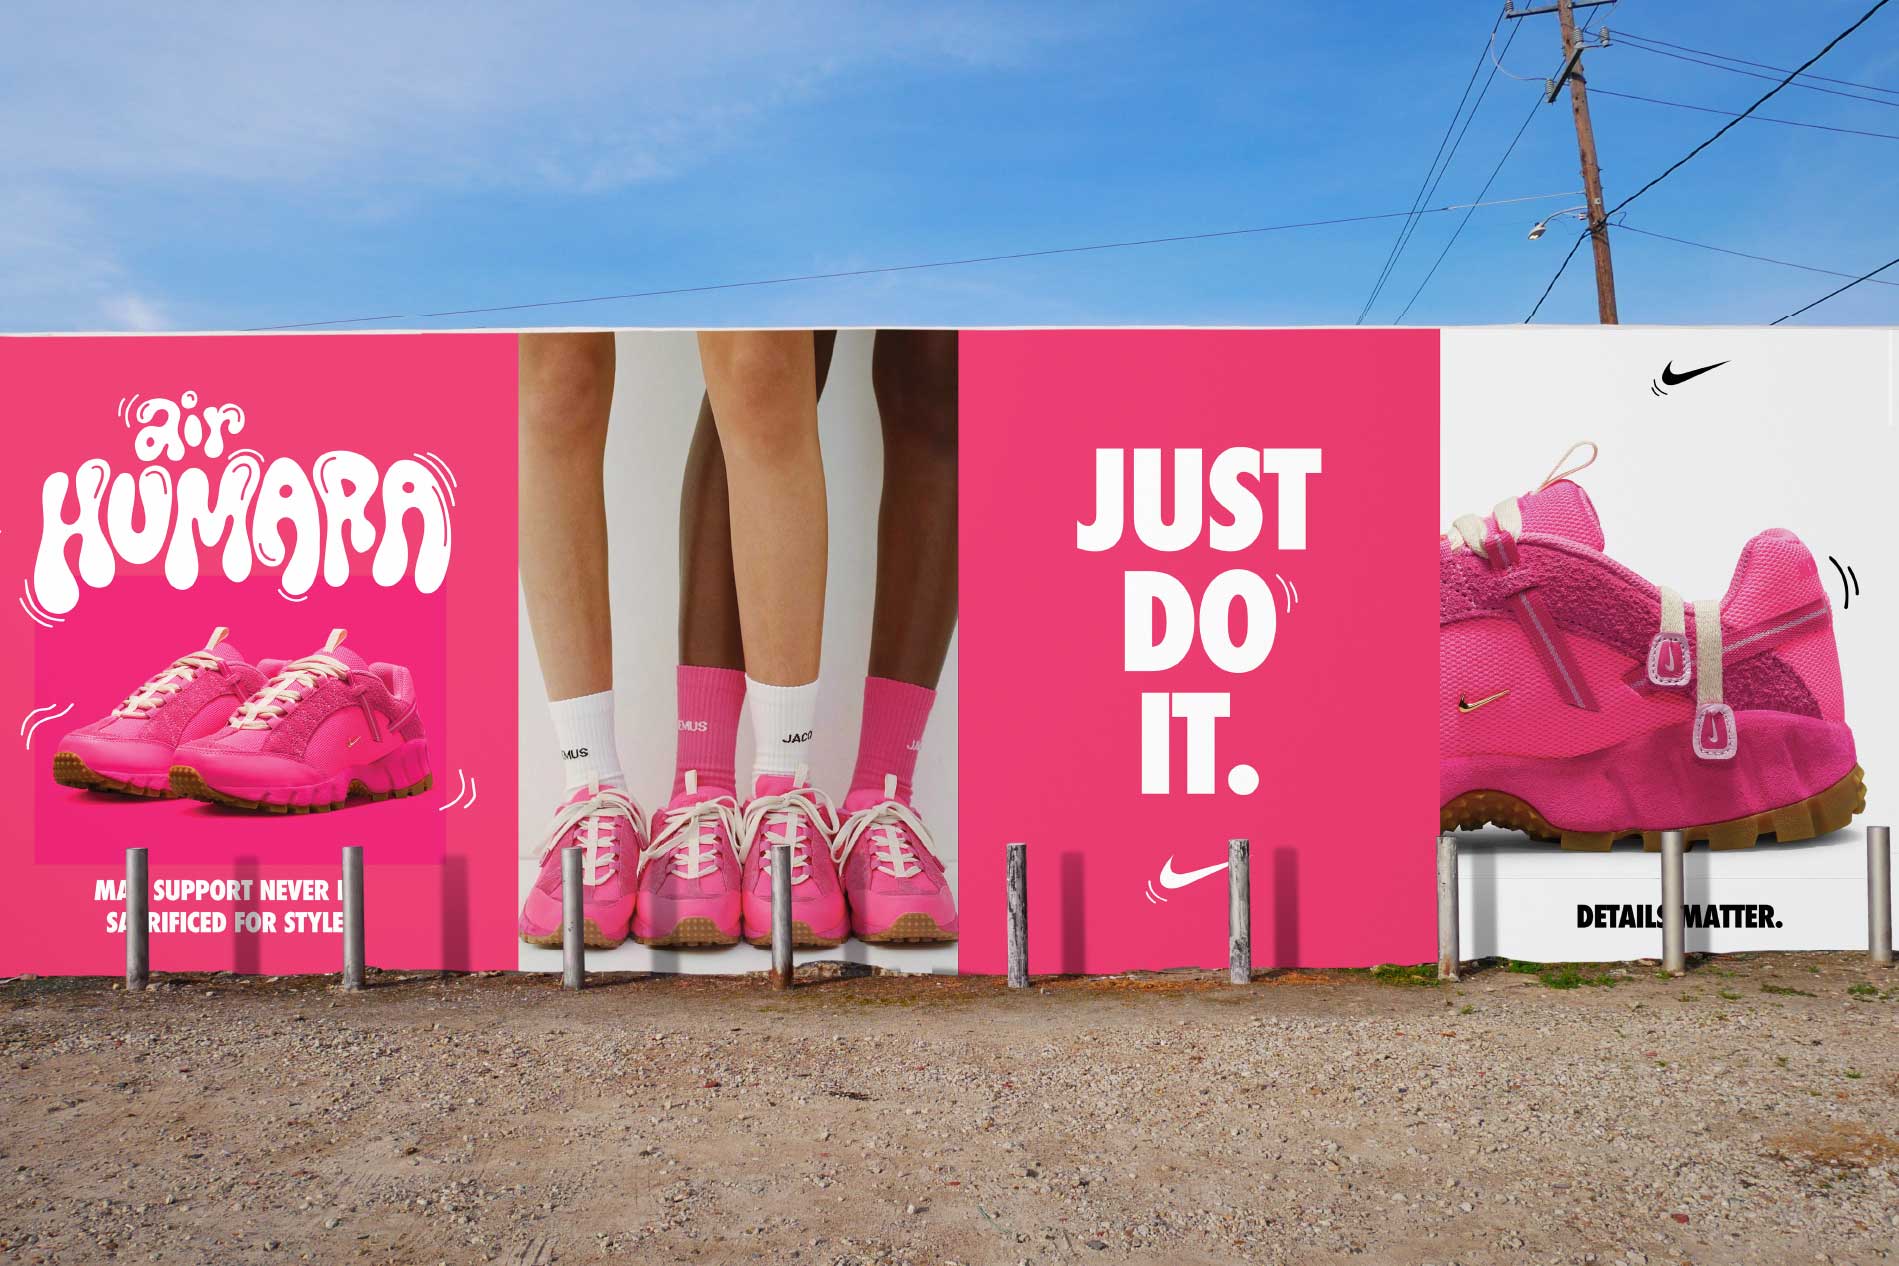 Nike Air Humara Campaign / “Nike Air Humara Campaign,” Billboard Advertisement, 14x48 feet, 2022.  This design features vibrant and eye-catching shades of pink, with bold typography and graphic elements that are inspired by the sneaker's distinctive design. The overall effect is a 